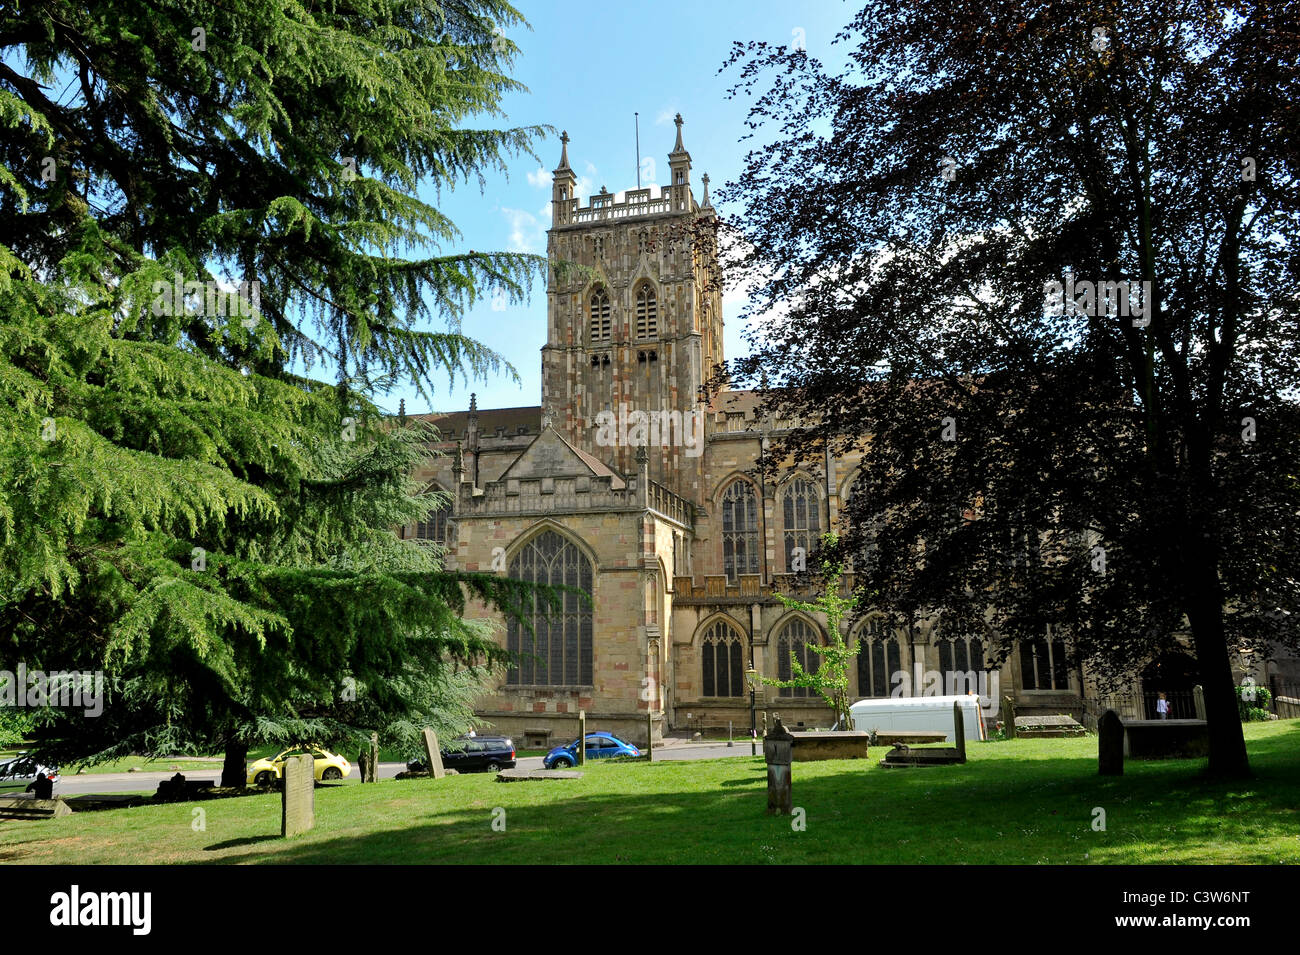 Great Malvern Priory, Malvern, Worcestershire first built 1085 for thirty monks was rebuilt in the 15th century. Stock Photo